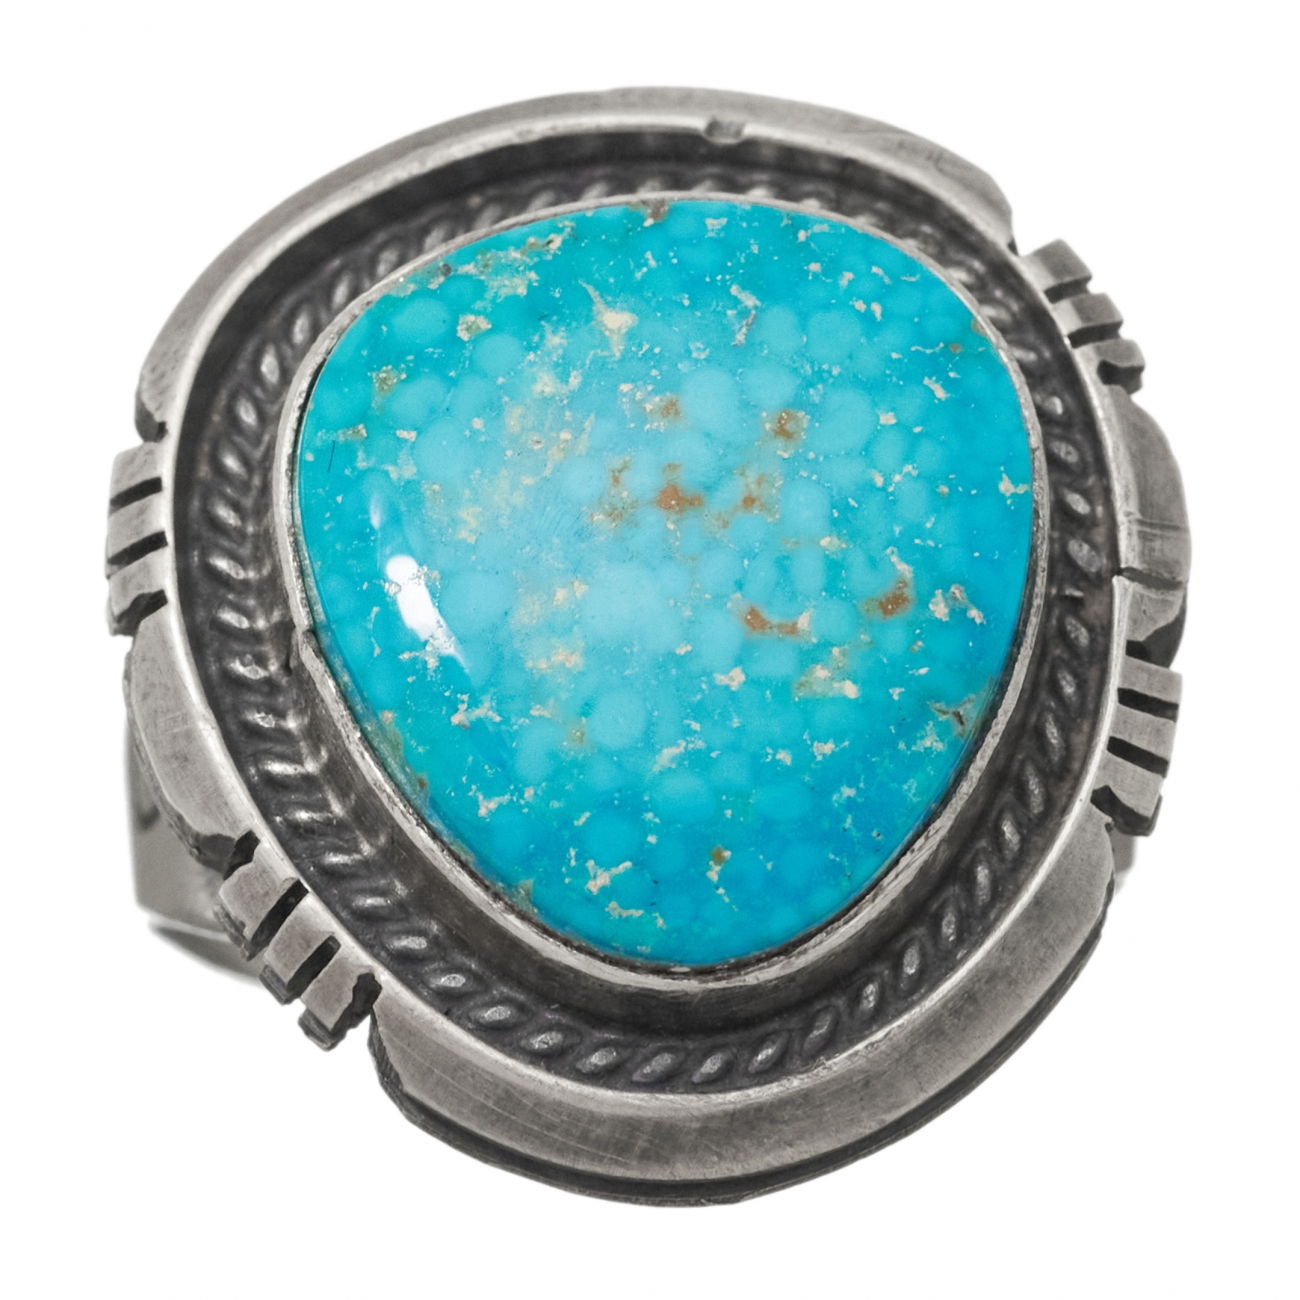 Navajo ring for women BA1093 in turquoise and mat silver - Harpo Paris